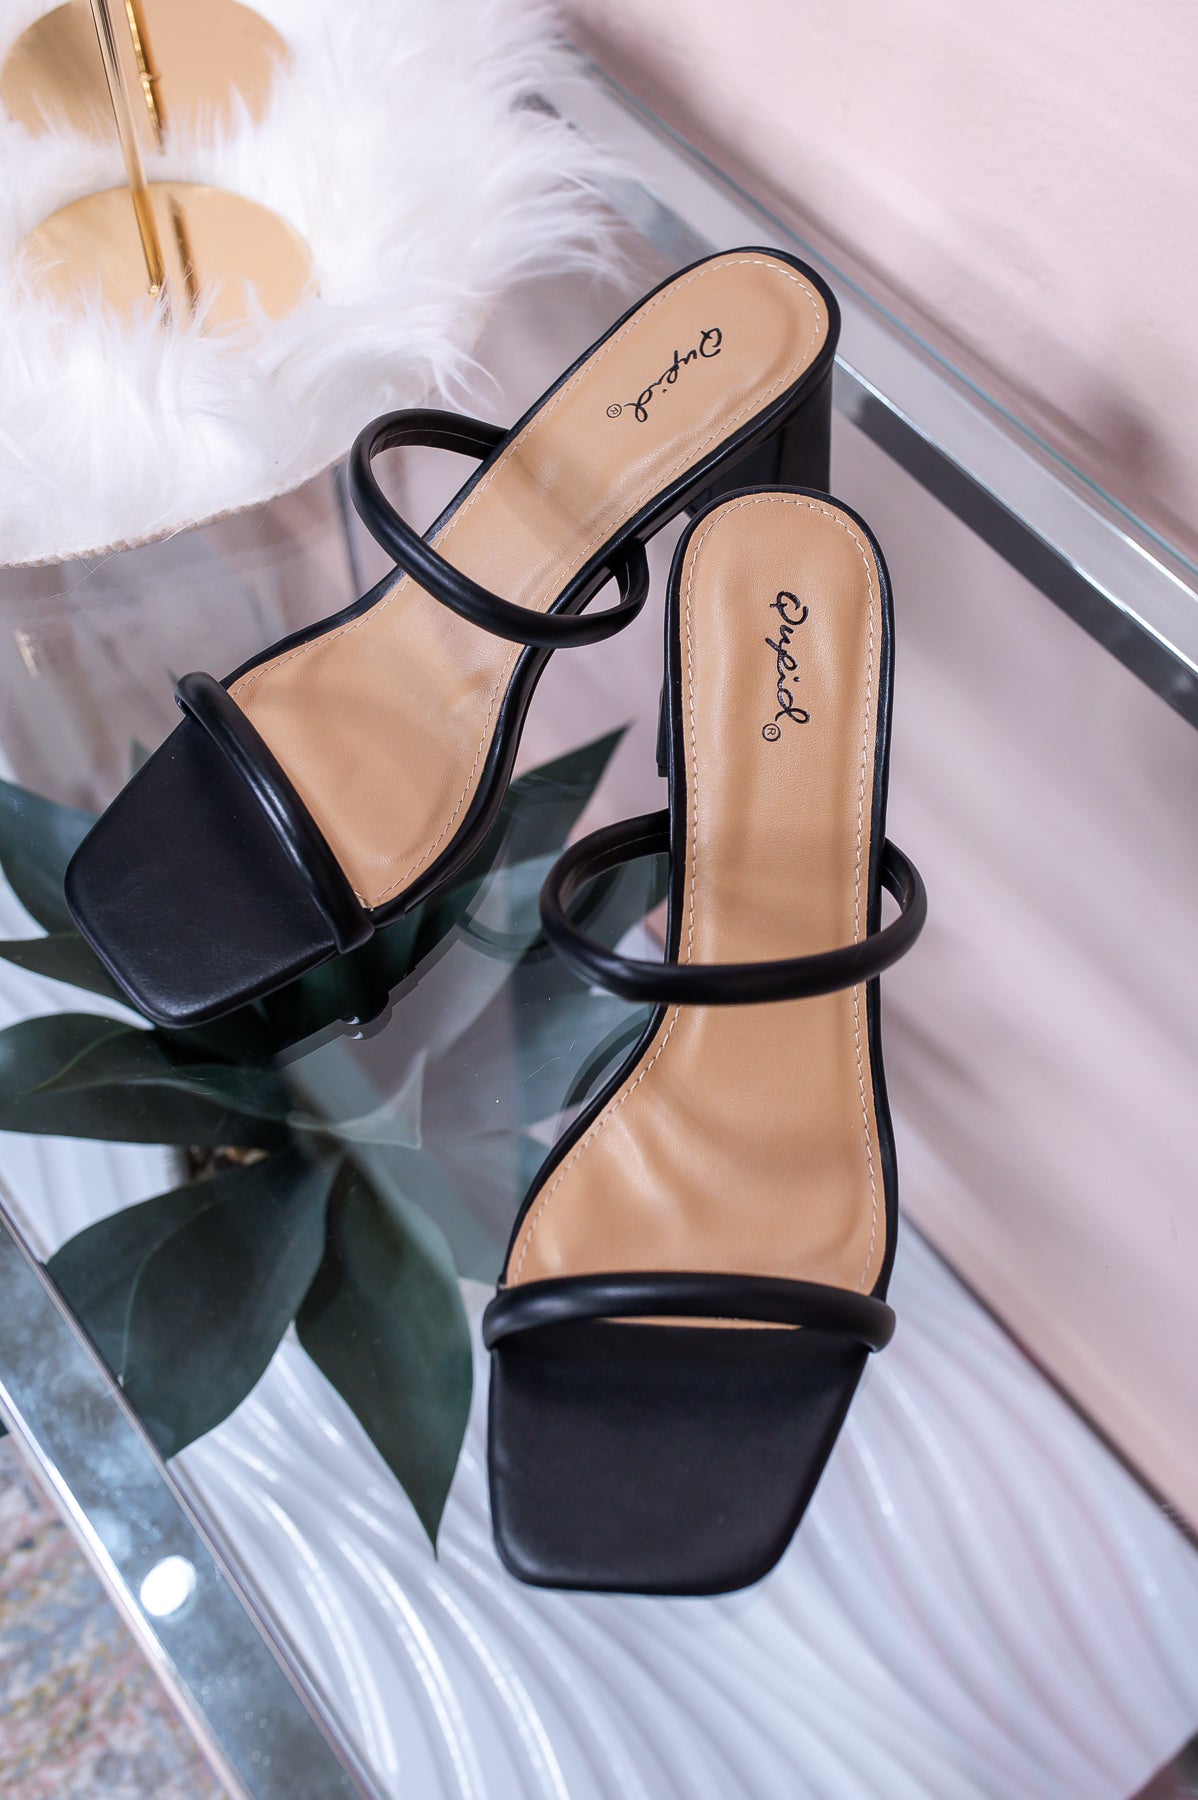 Serious About Style Black Slip On Heels - SHO2543BK